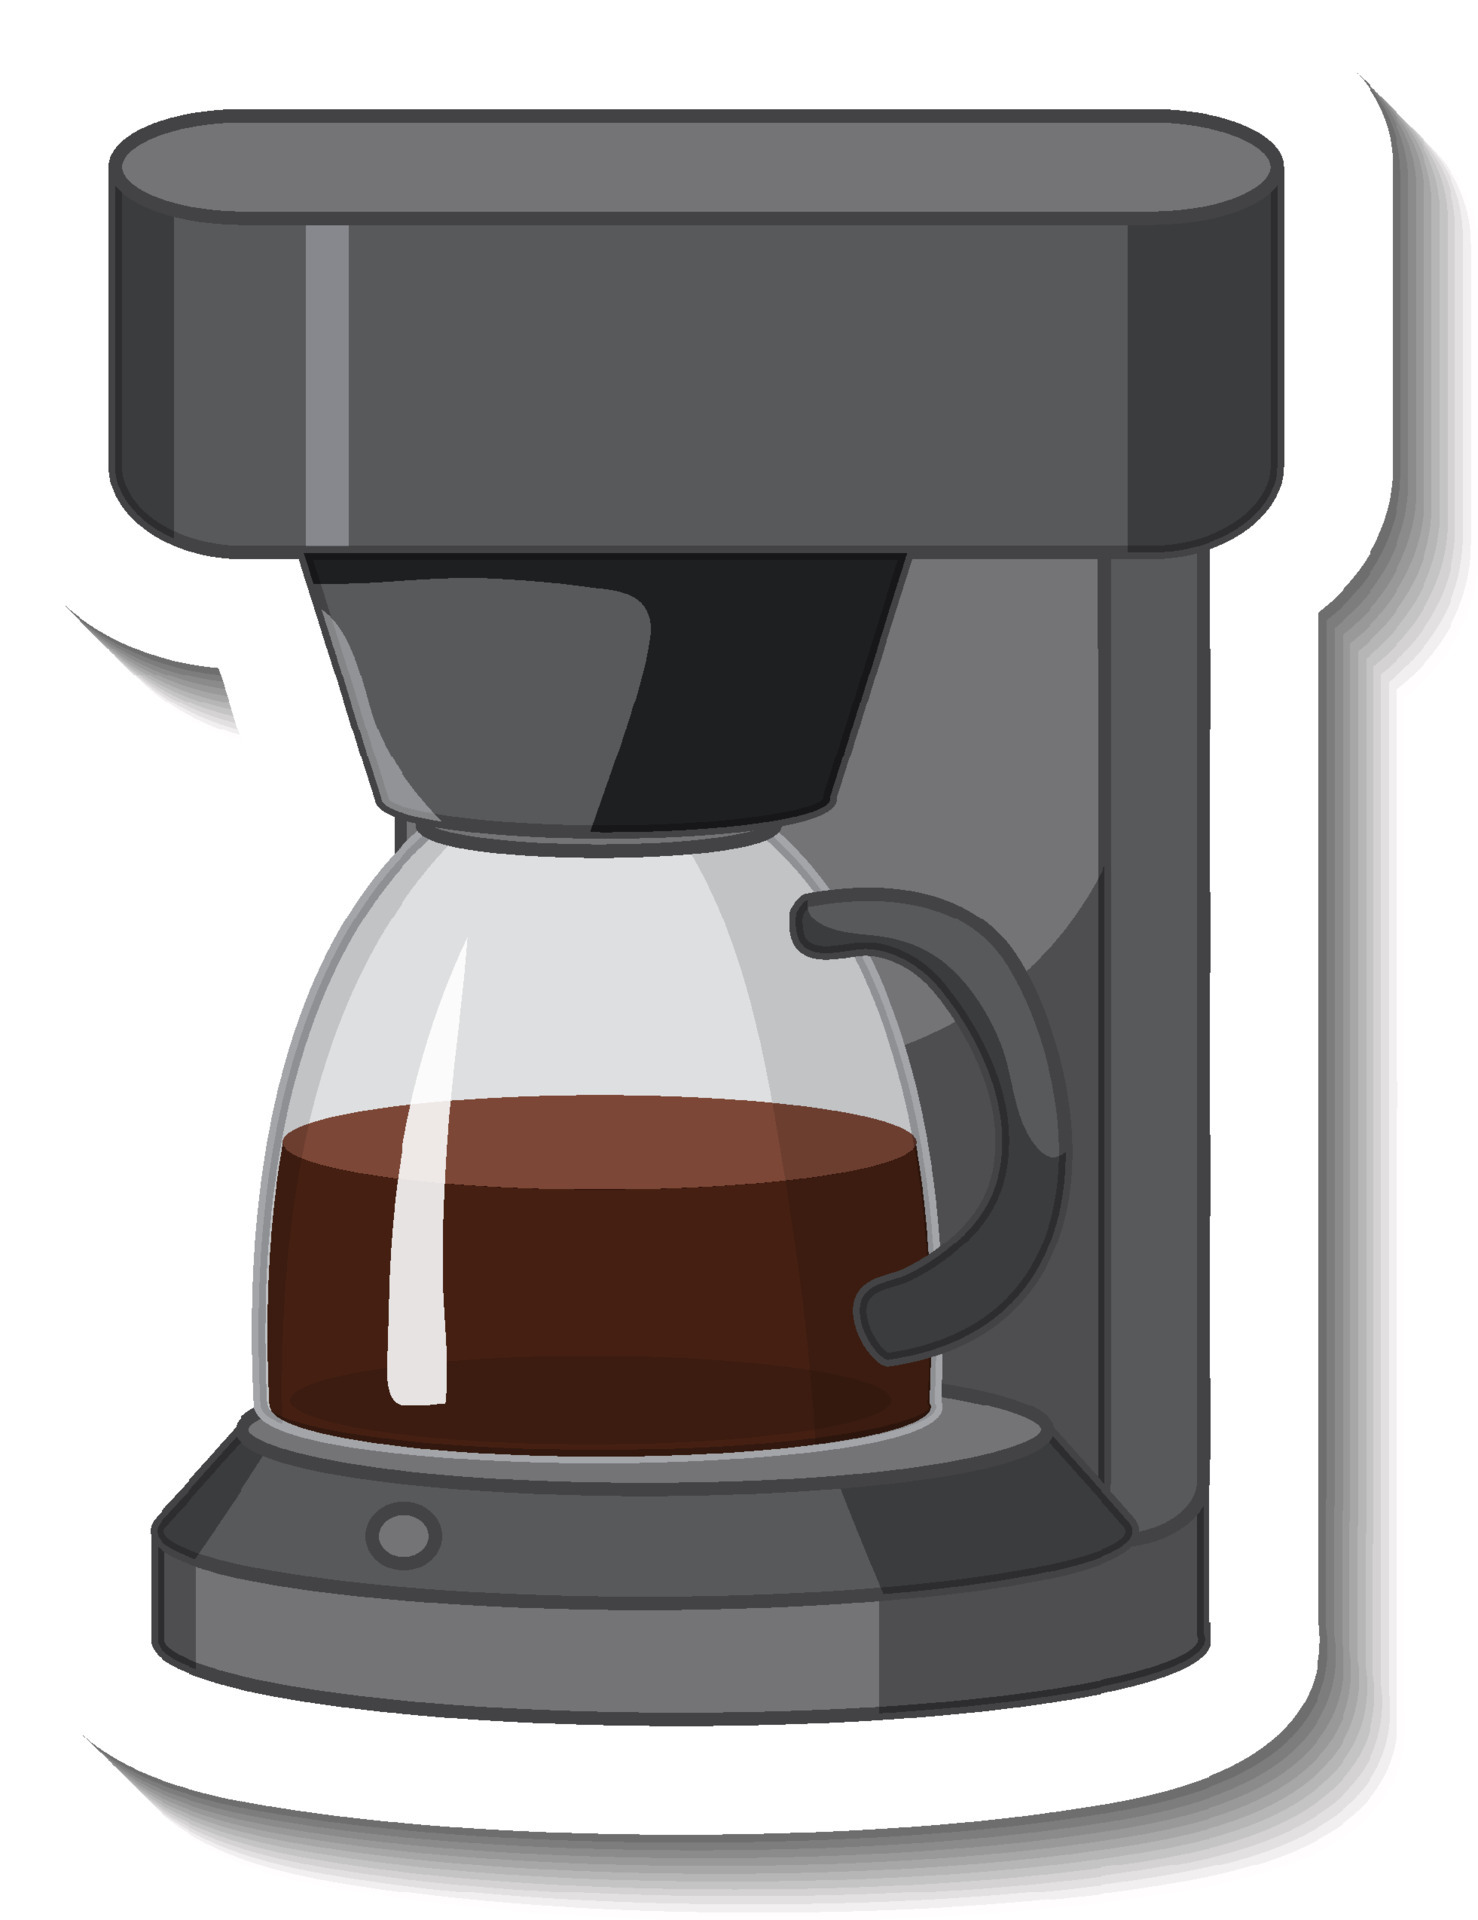 https://static.vecteezy.com/system/resources/previews/005/921/767/original/coffee-maker-isolated-on-white-background-free-vector.jpg